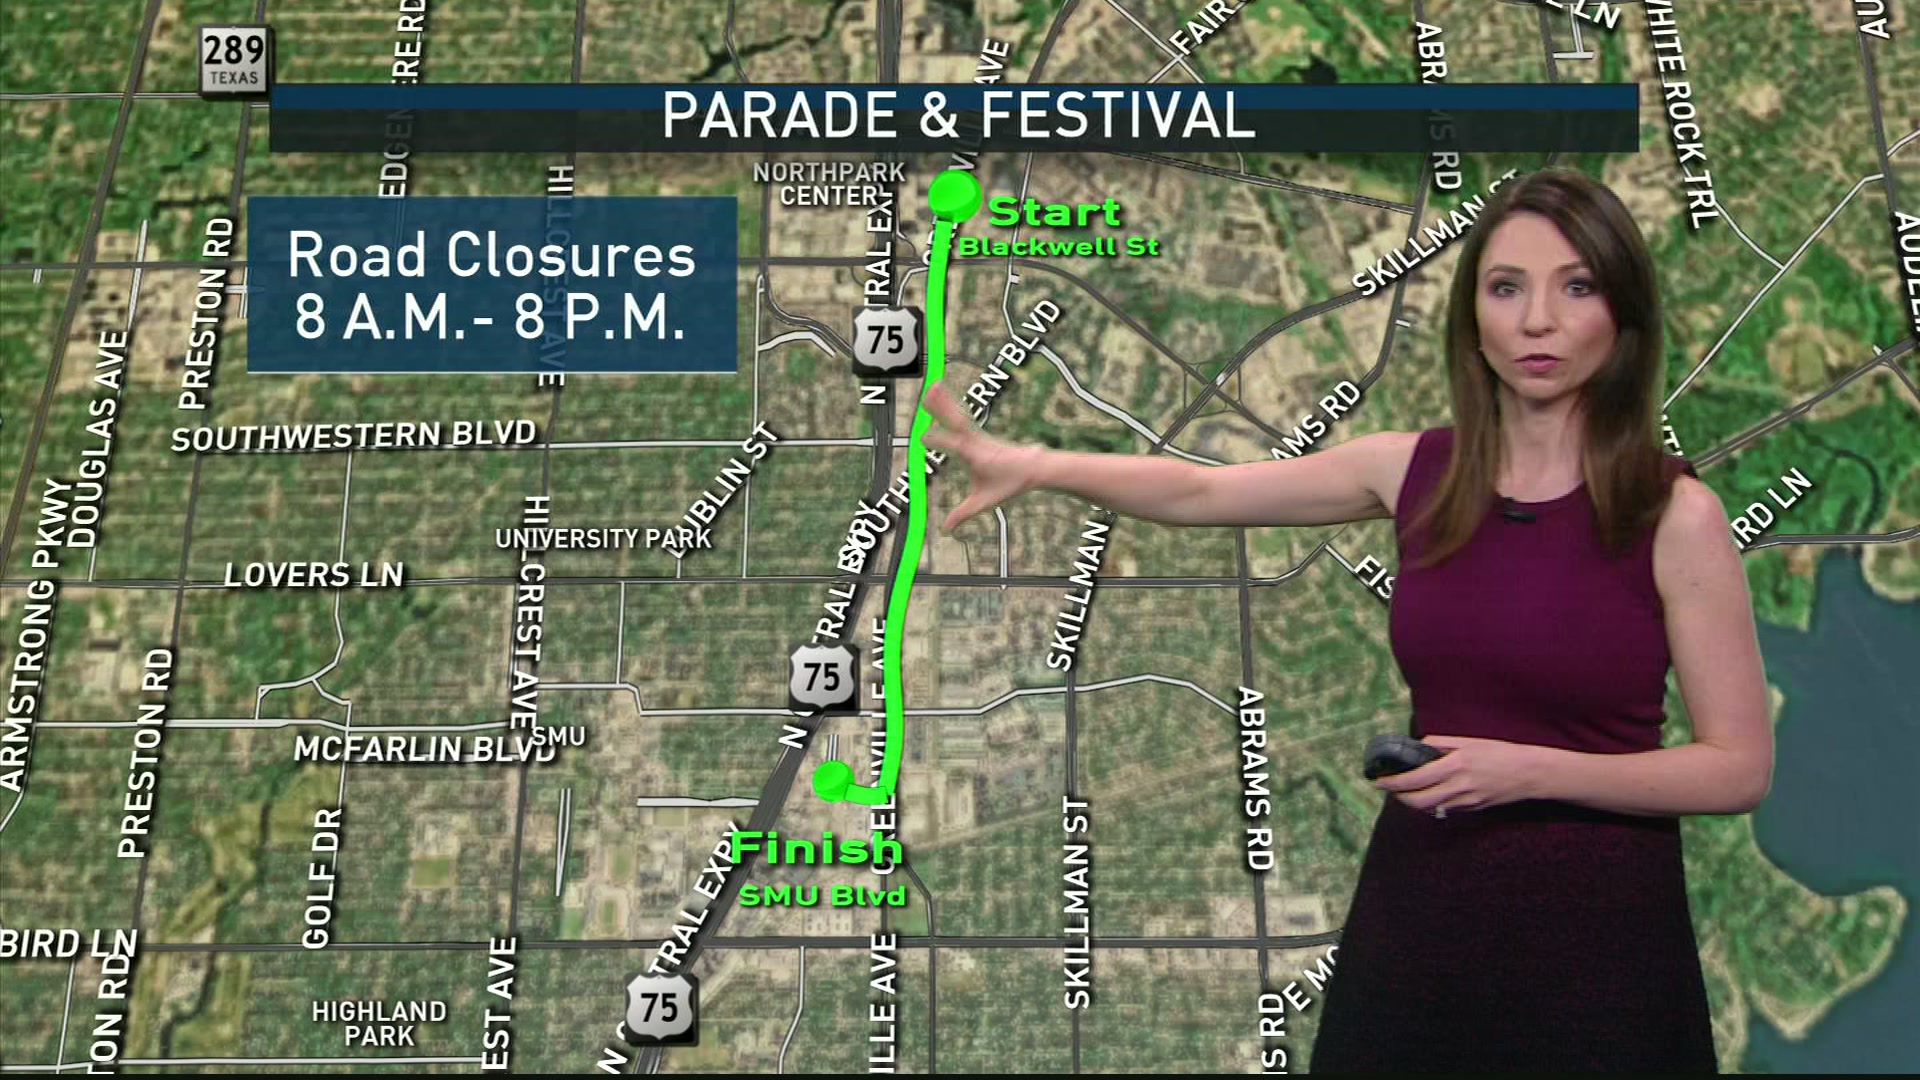 Dallas Roads Crowded for St. Patrick's Day